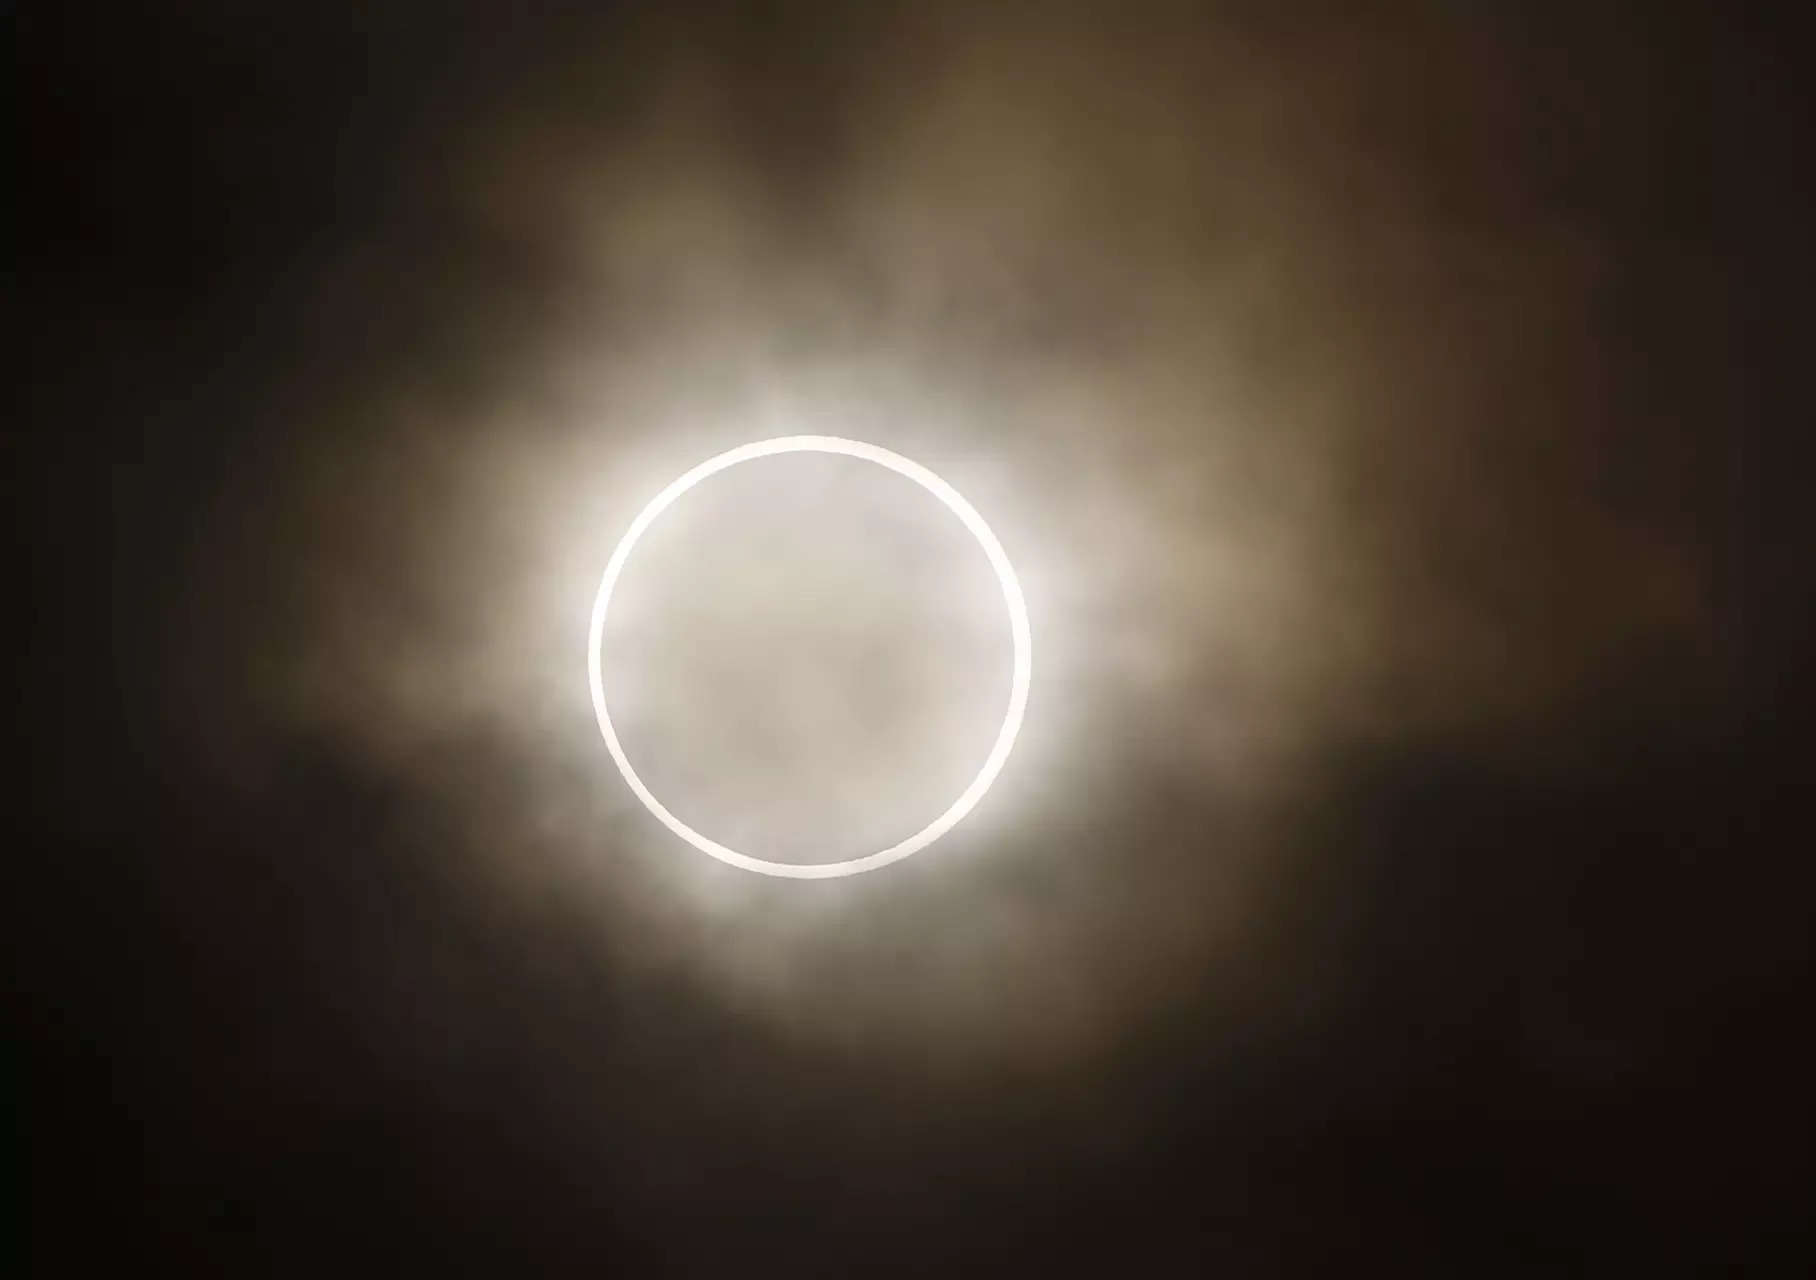 'Ring of fire' solar eclipse across Americas: Will cloudy weather ruin the view?